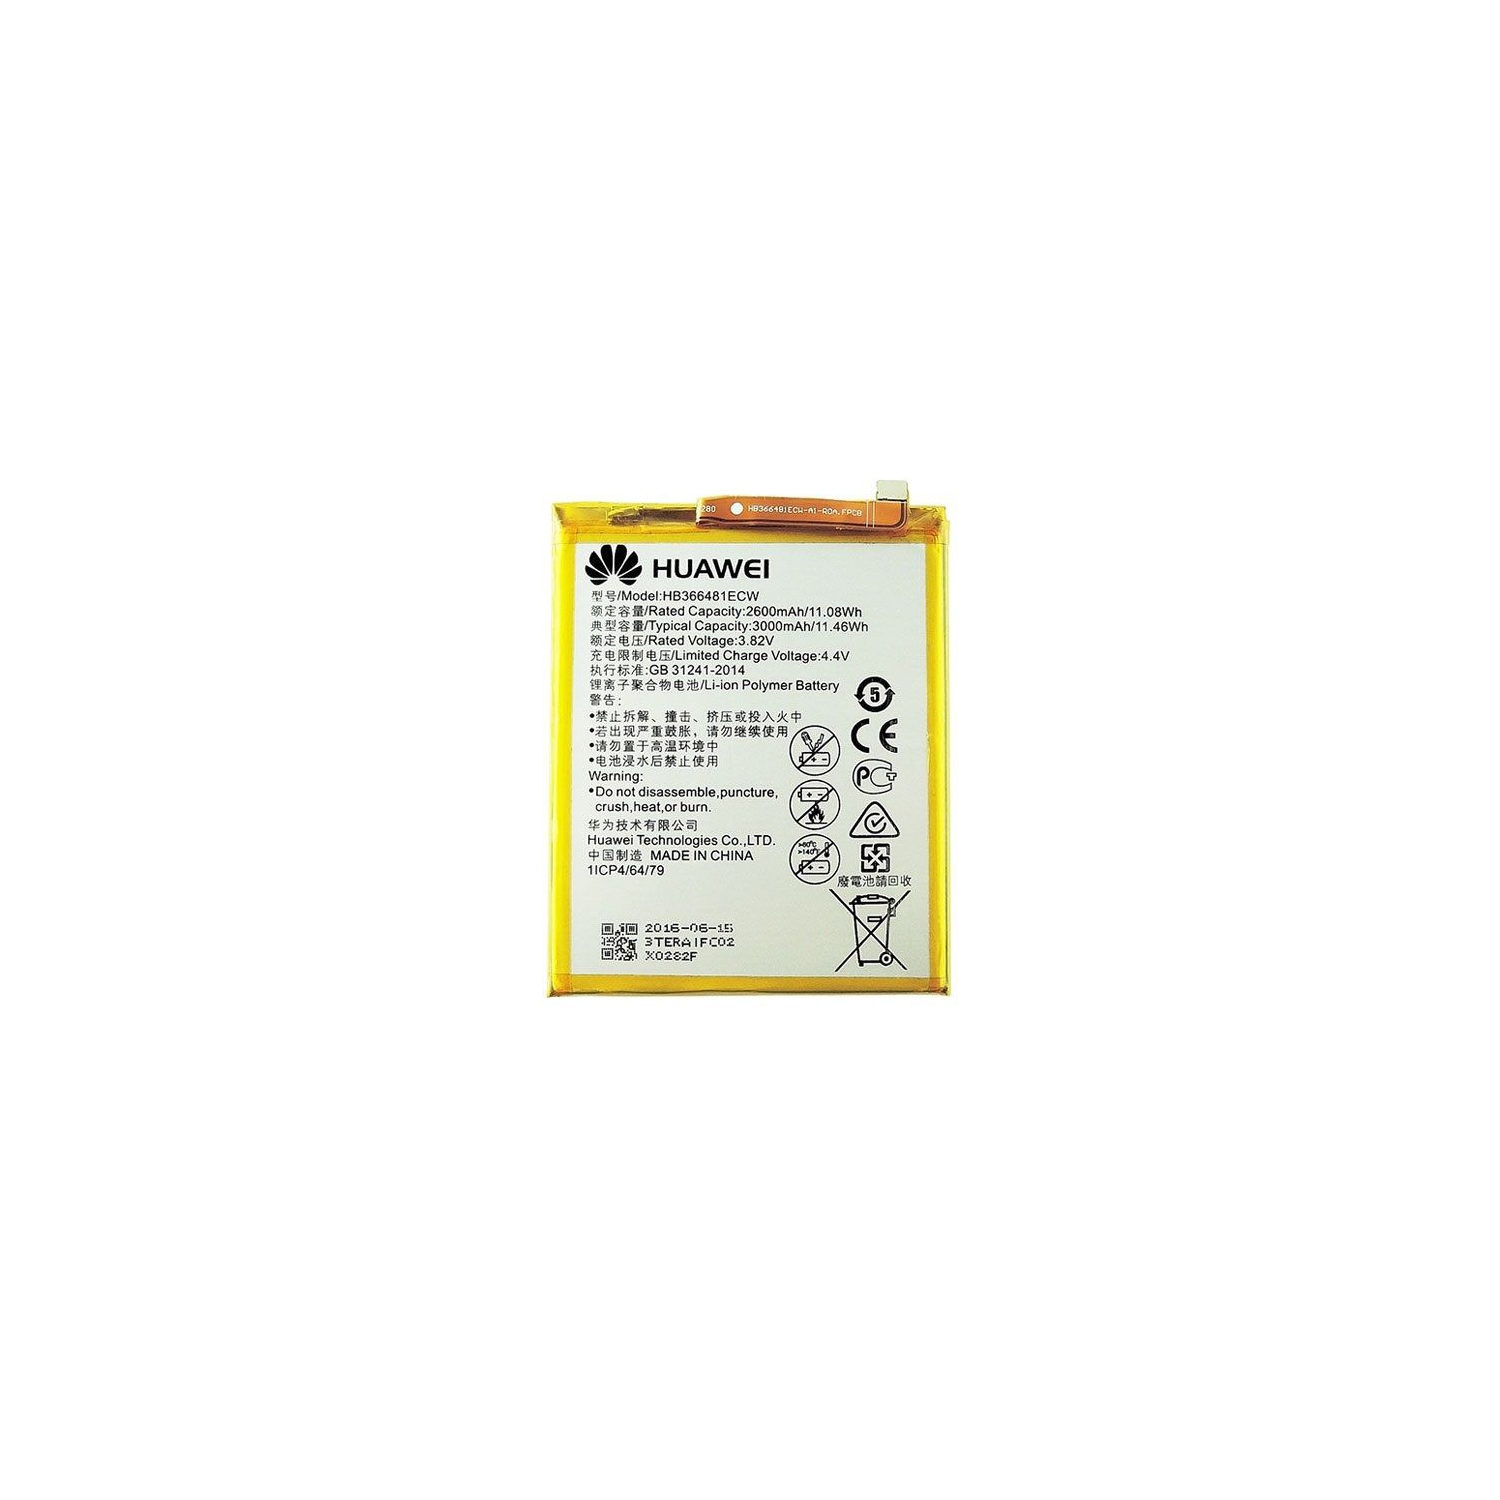 Replacement Battery for Huawei Honor 8 / P9 / P9 Lite, HB366481ECW